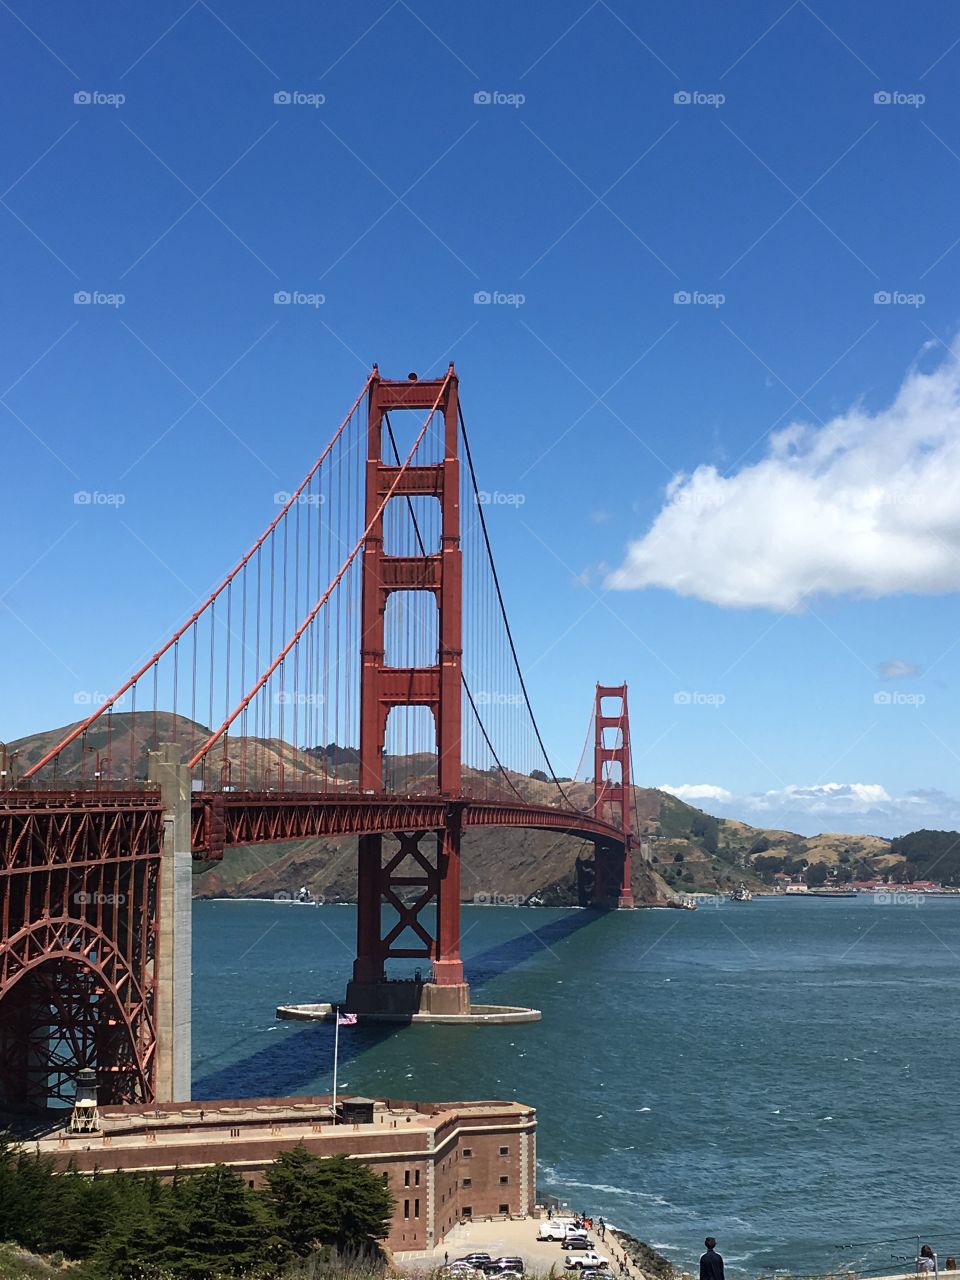 Amazing view of the Golden Gare Bridge in the San Francisco Bay